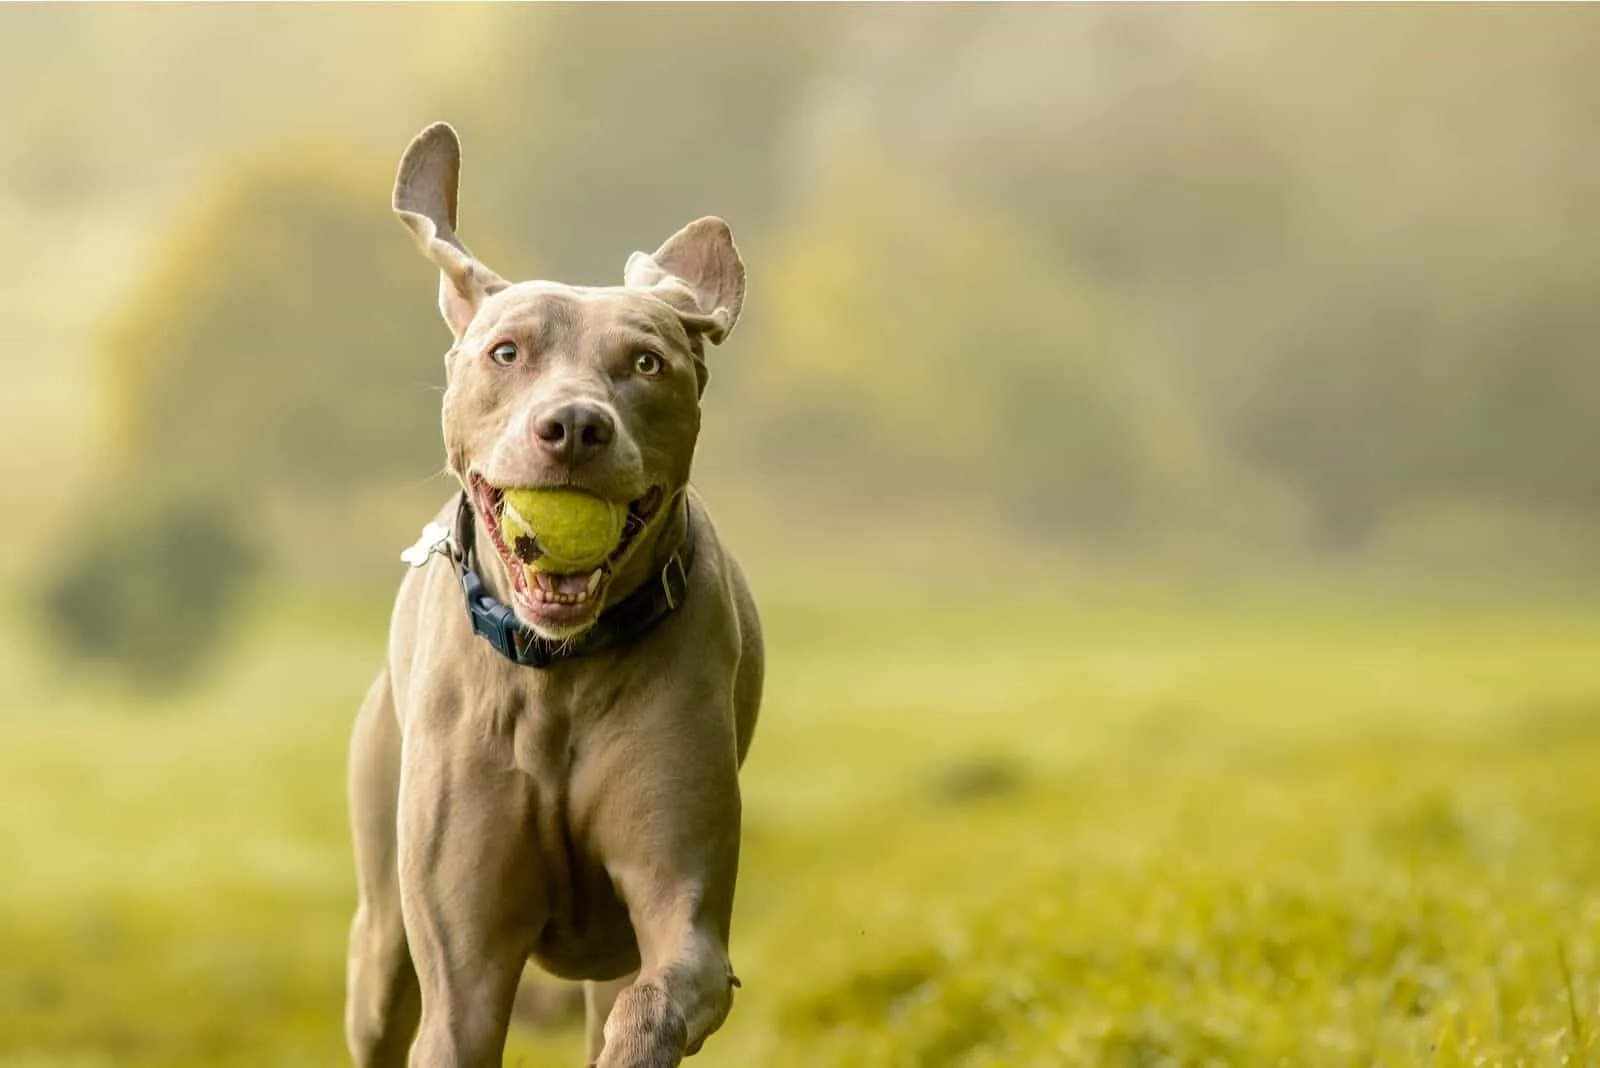 Weimaraner Pitbull crossbreed running and carrying ball in its mouth